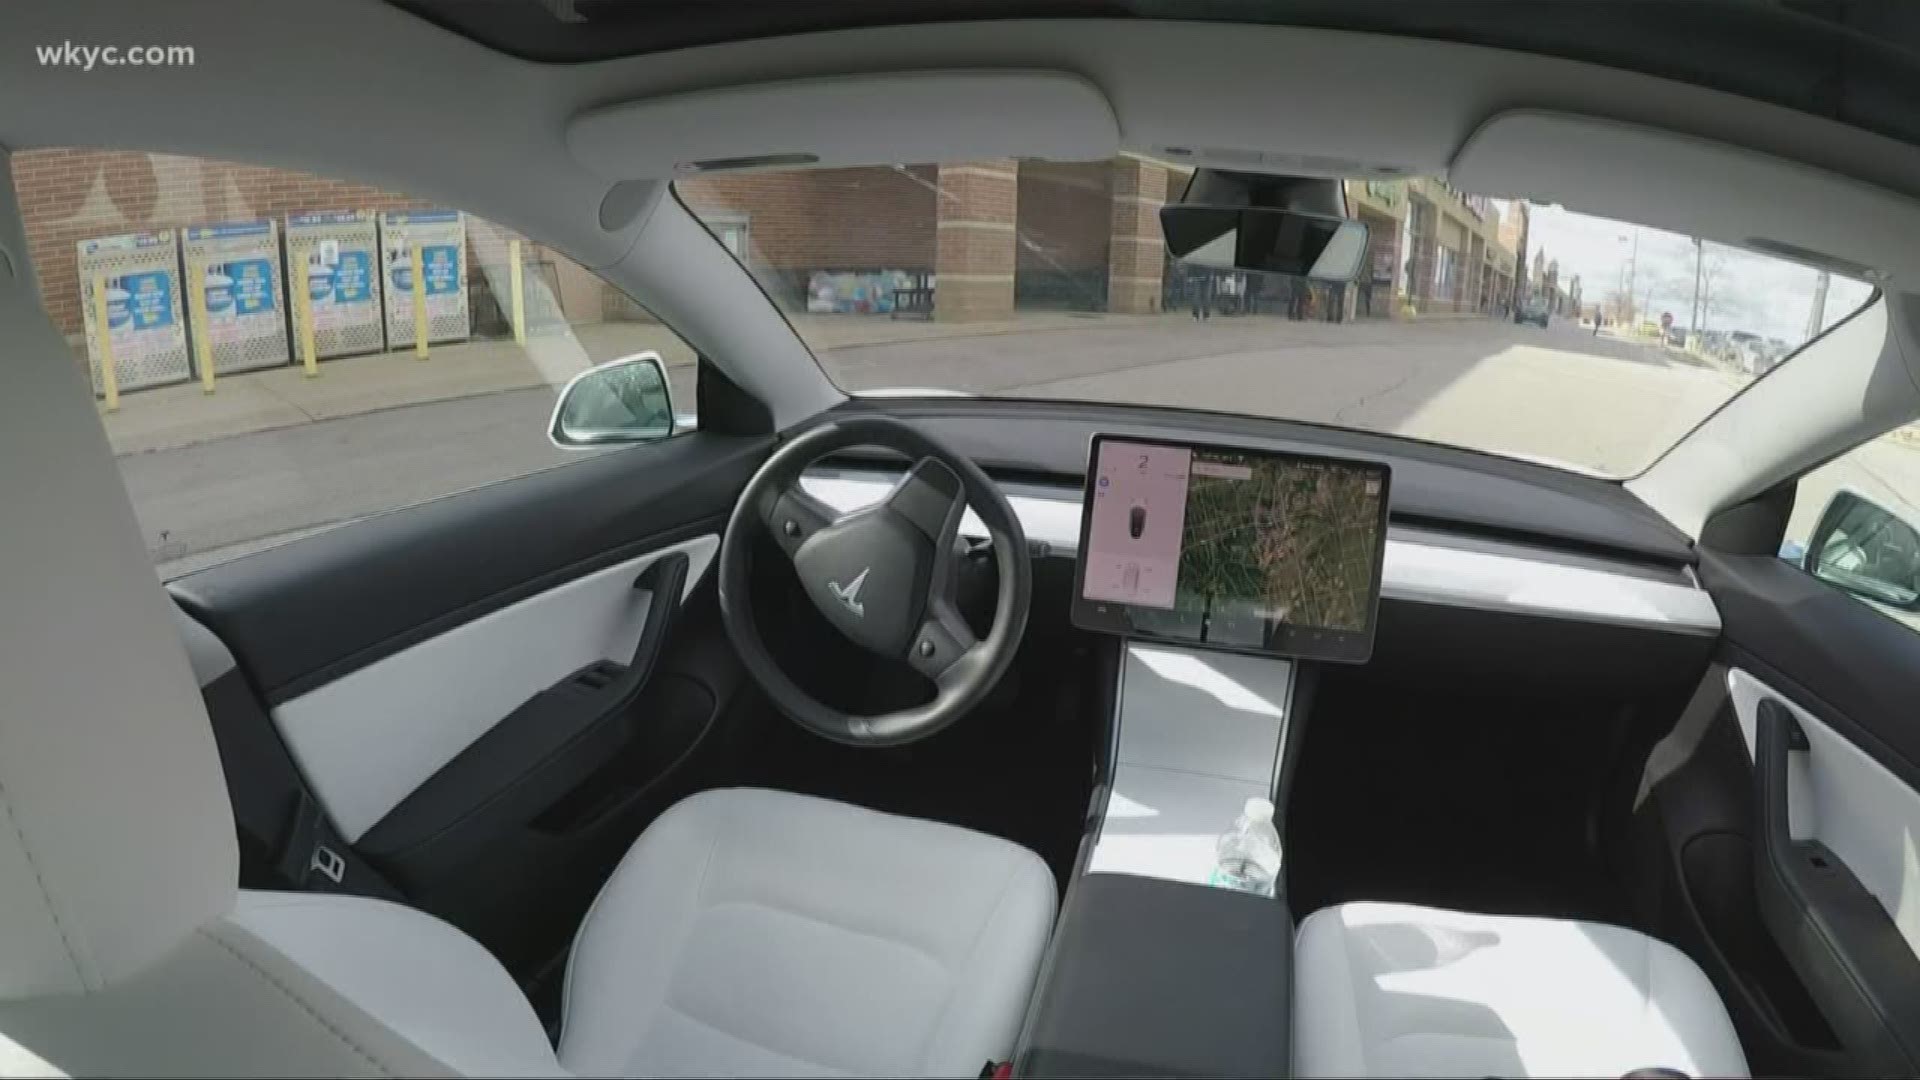 Tesla has released technology that allows the car to drive itself – a personal valet of sorts. It's called Smart Summon.